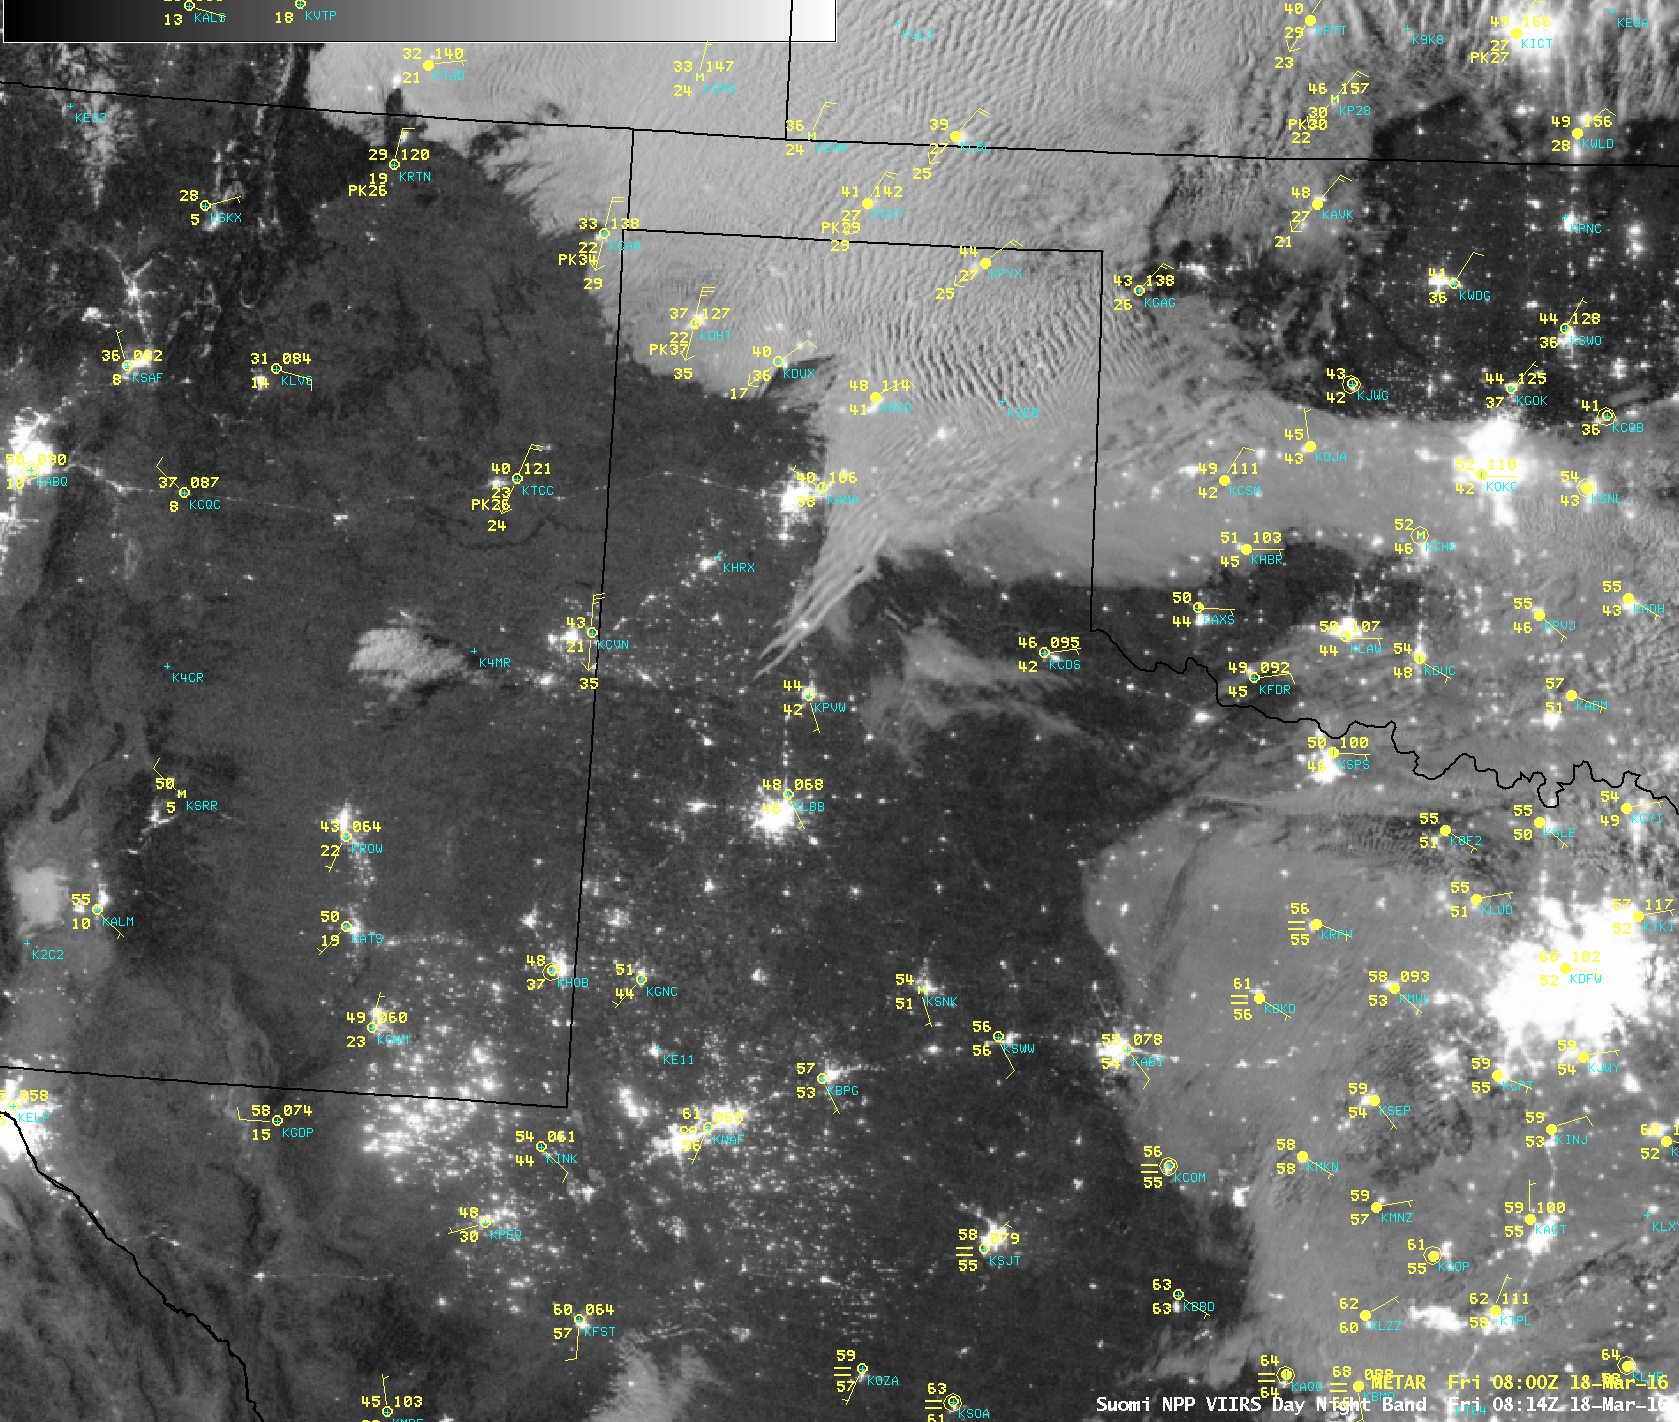 Suomi NPP VIIRS Day/Night Band (0.7 µm) image [click to enlarge]